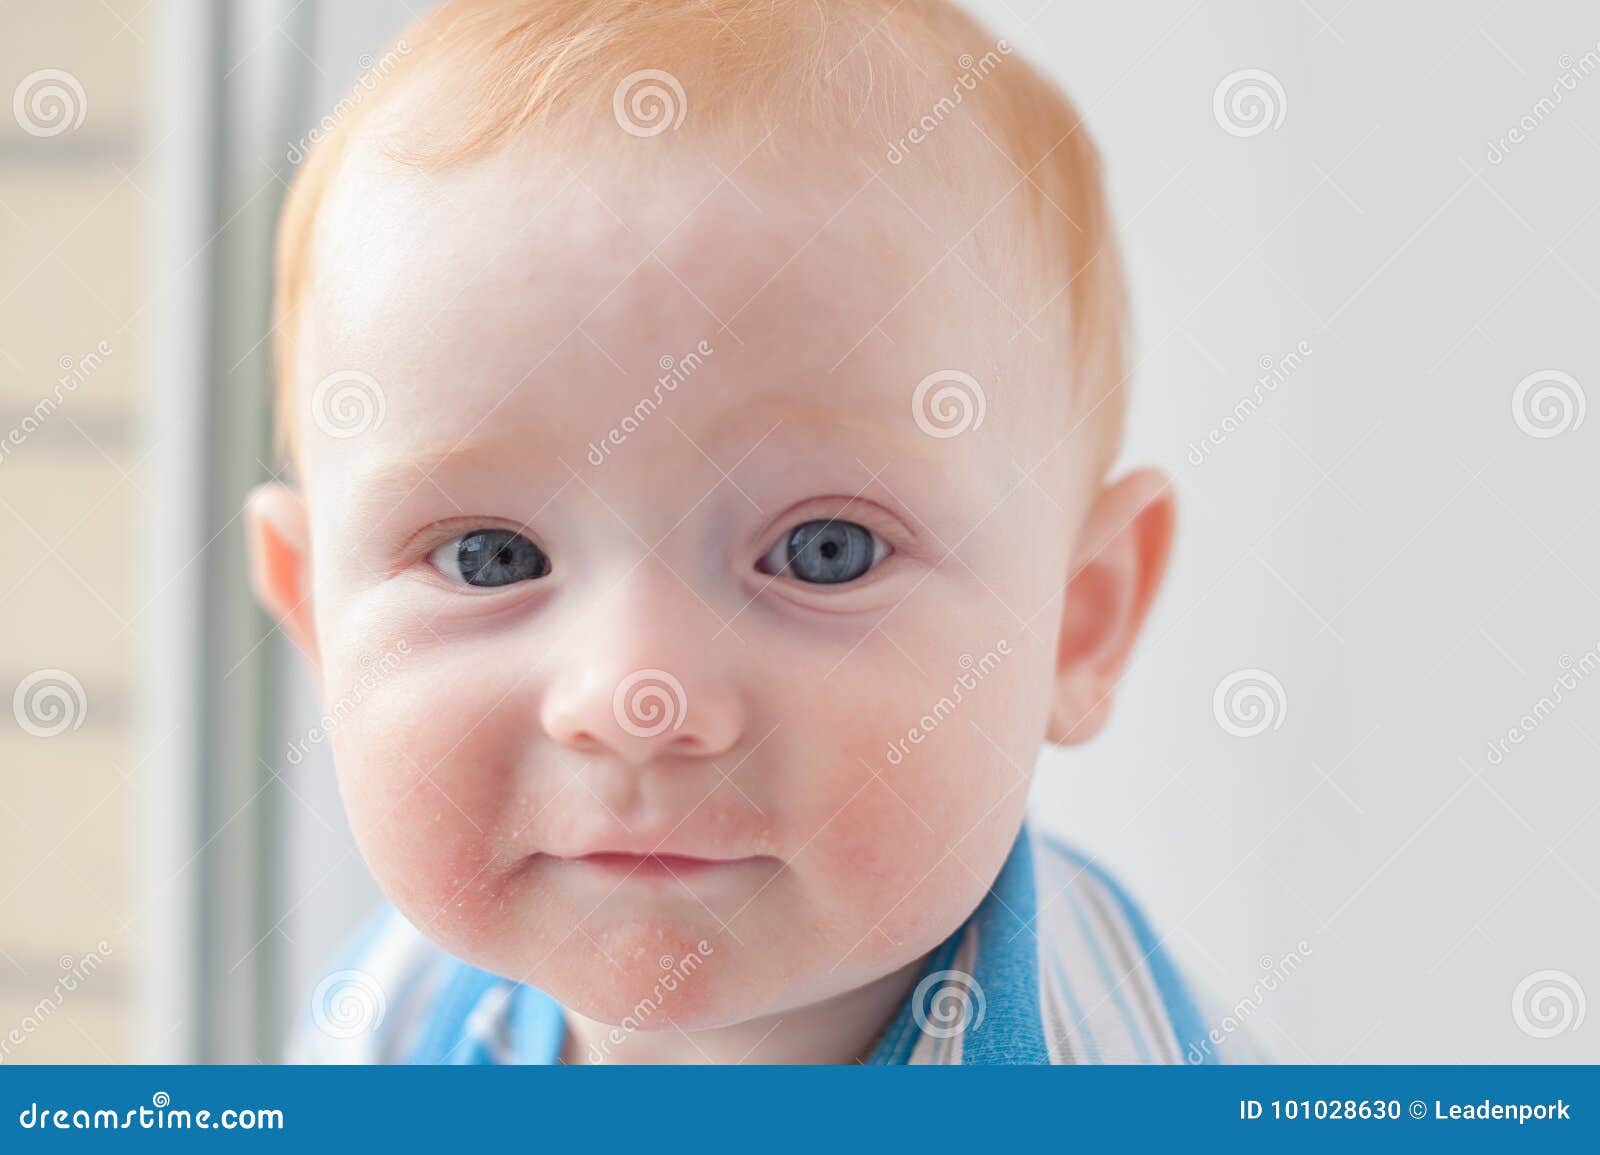 baby boy with atopic dermatitis